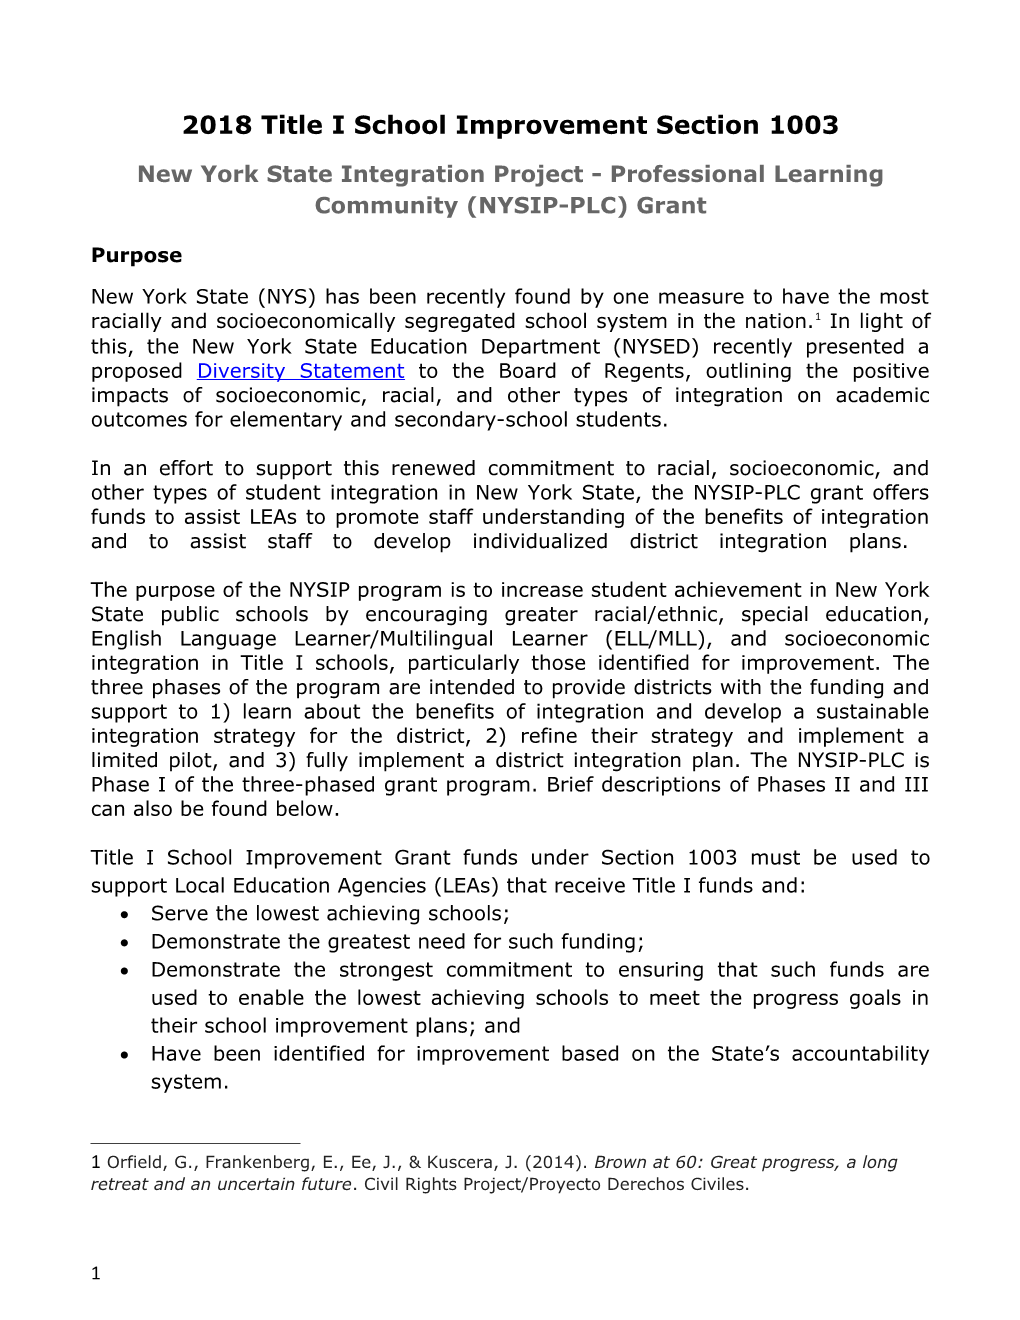 New York State Integration Project - Professional Learning Community (NYSIP-PLC) Grant